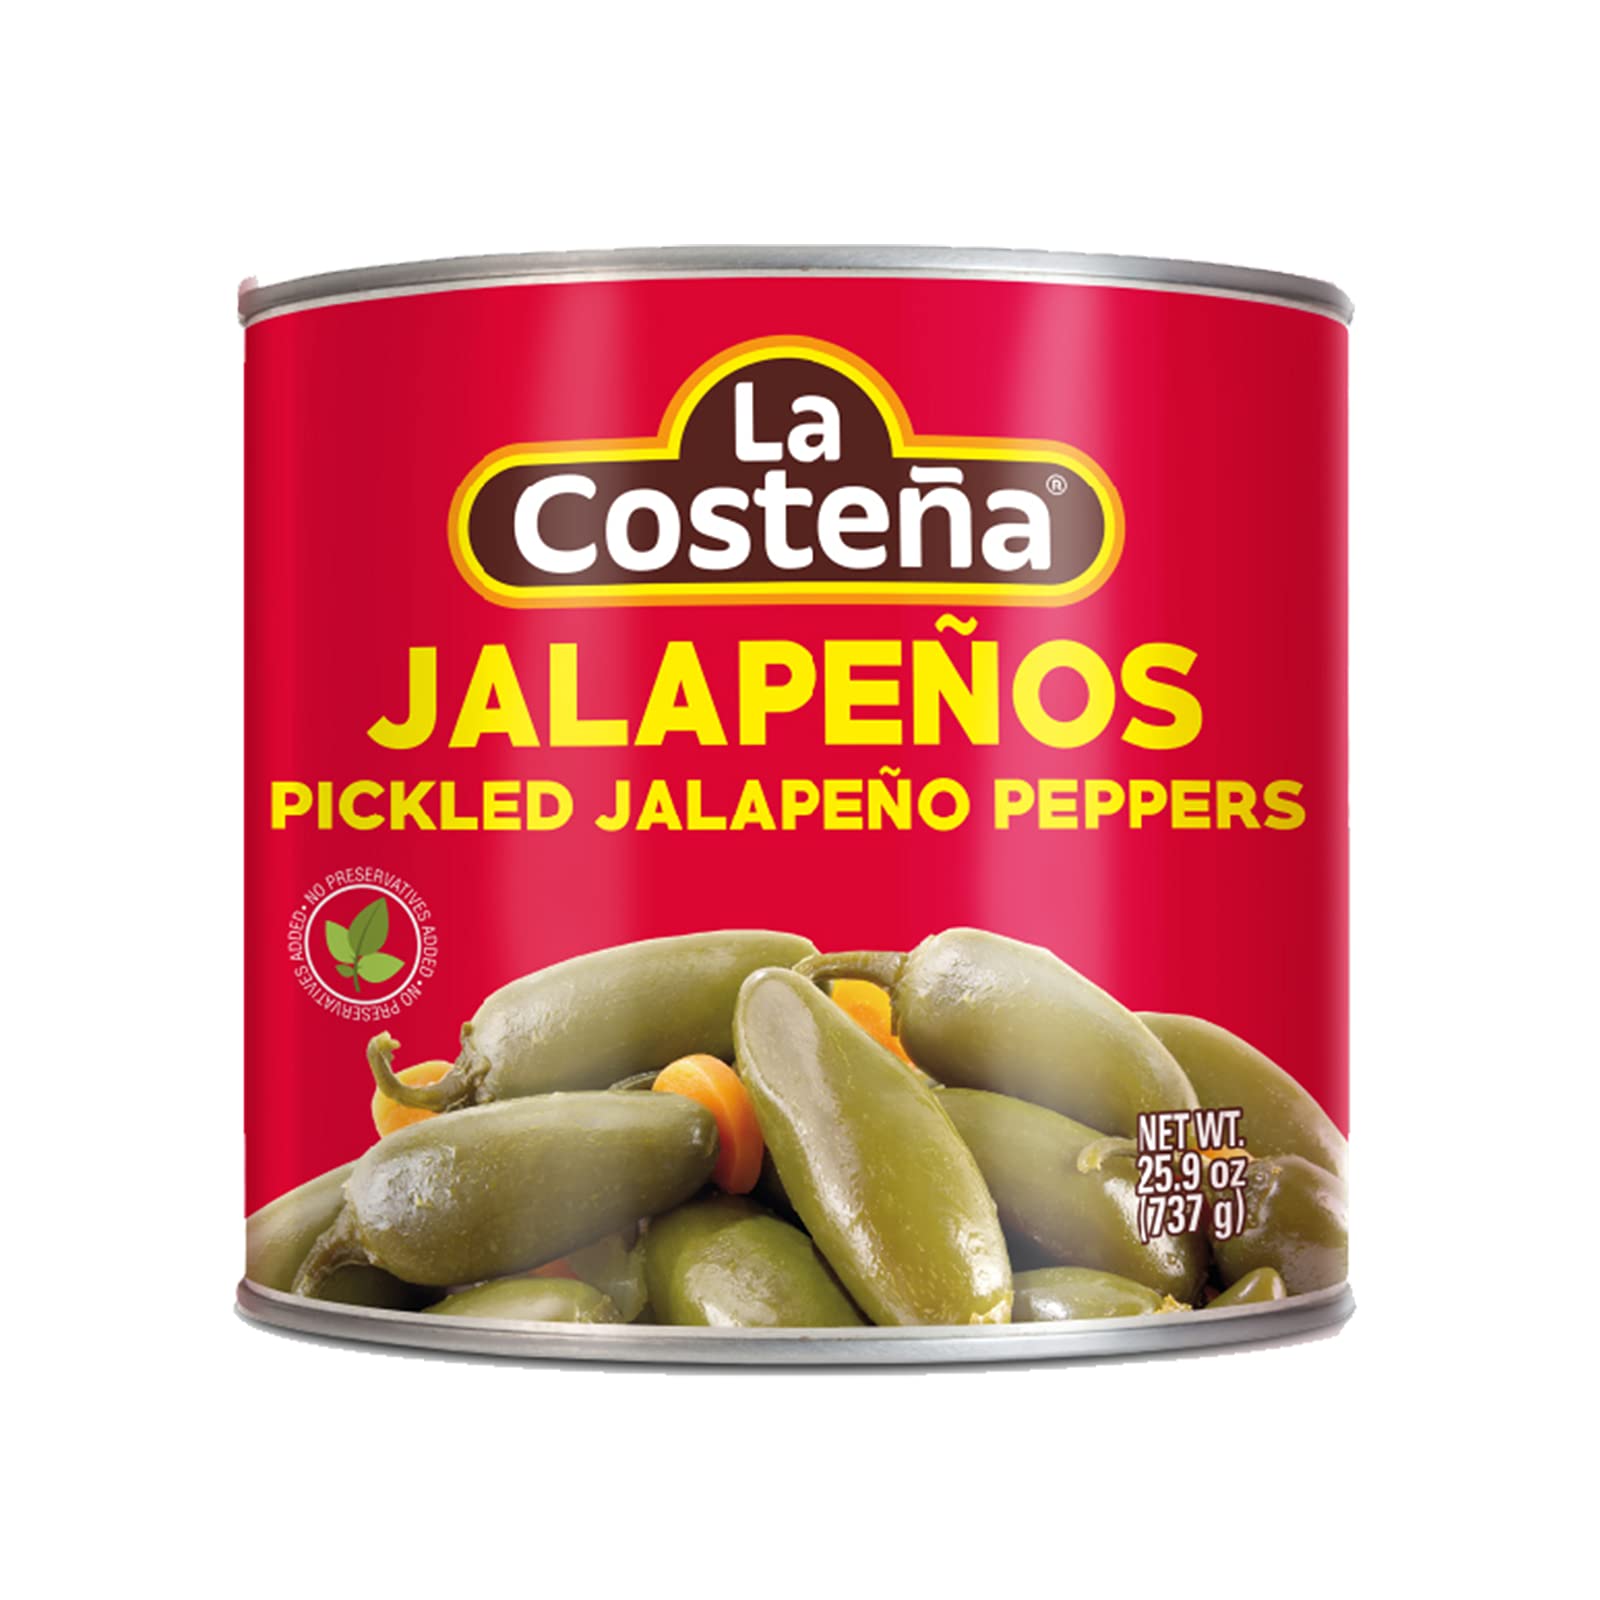 La Costeña Whole Pickled Jalapeño Peppers | Pickled Green Hot Jalapeños | 26 Ounce Can (Pack of 12) $17.76 Amazon FS W/Prime